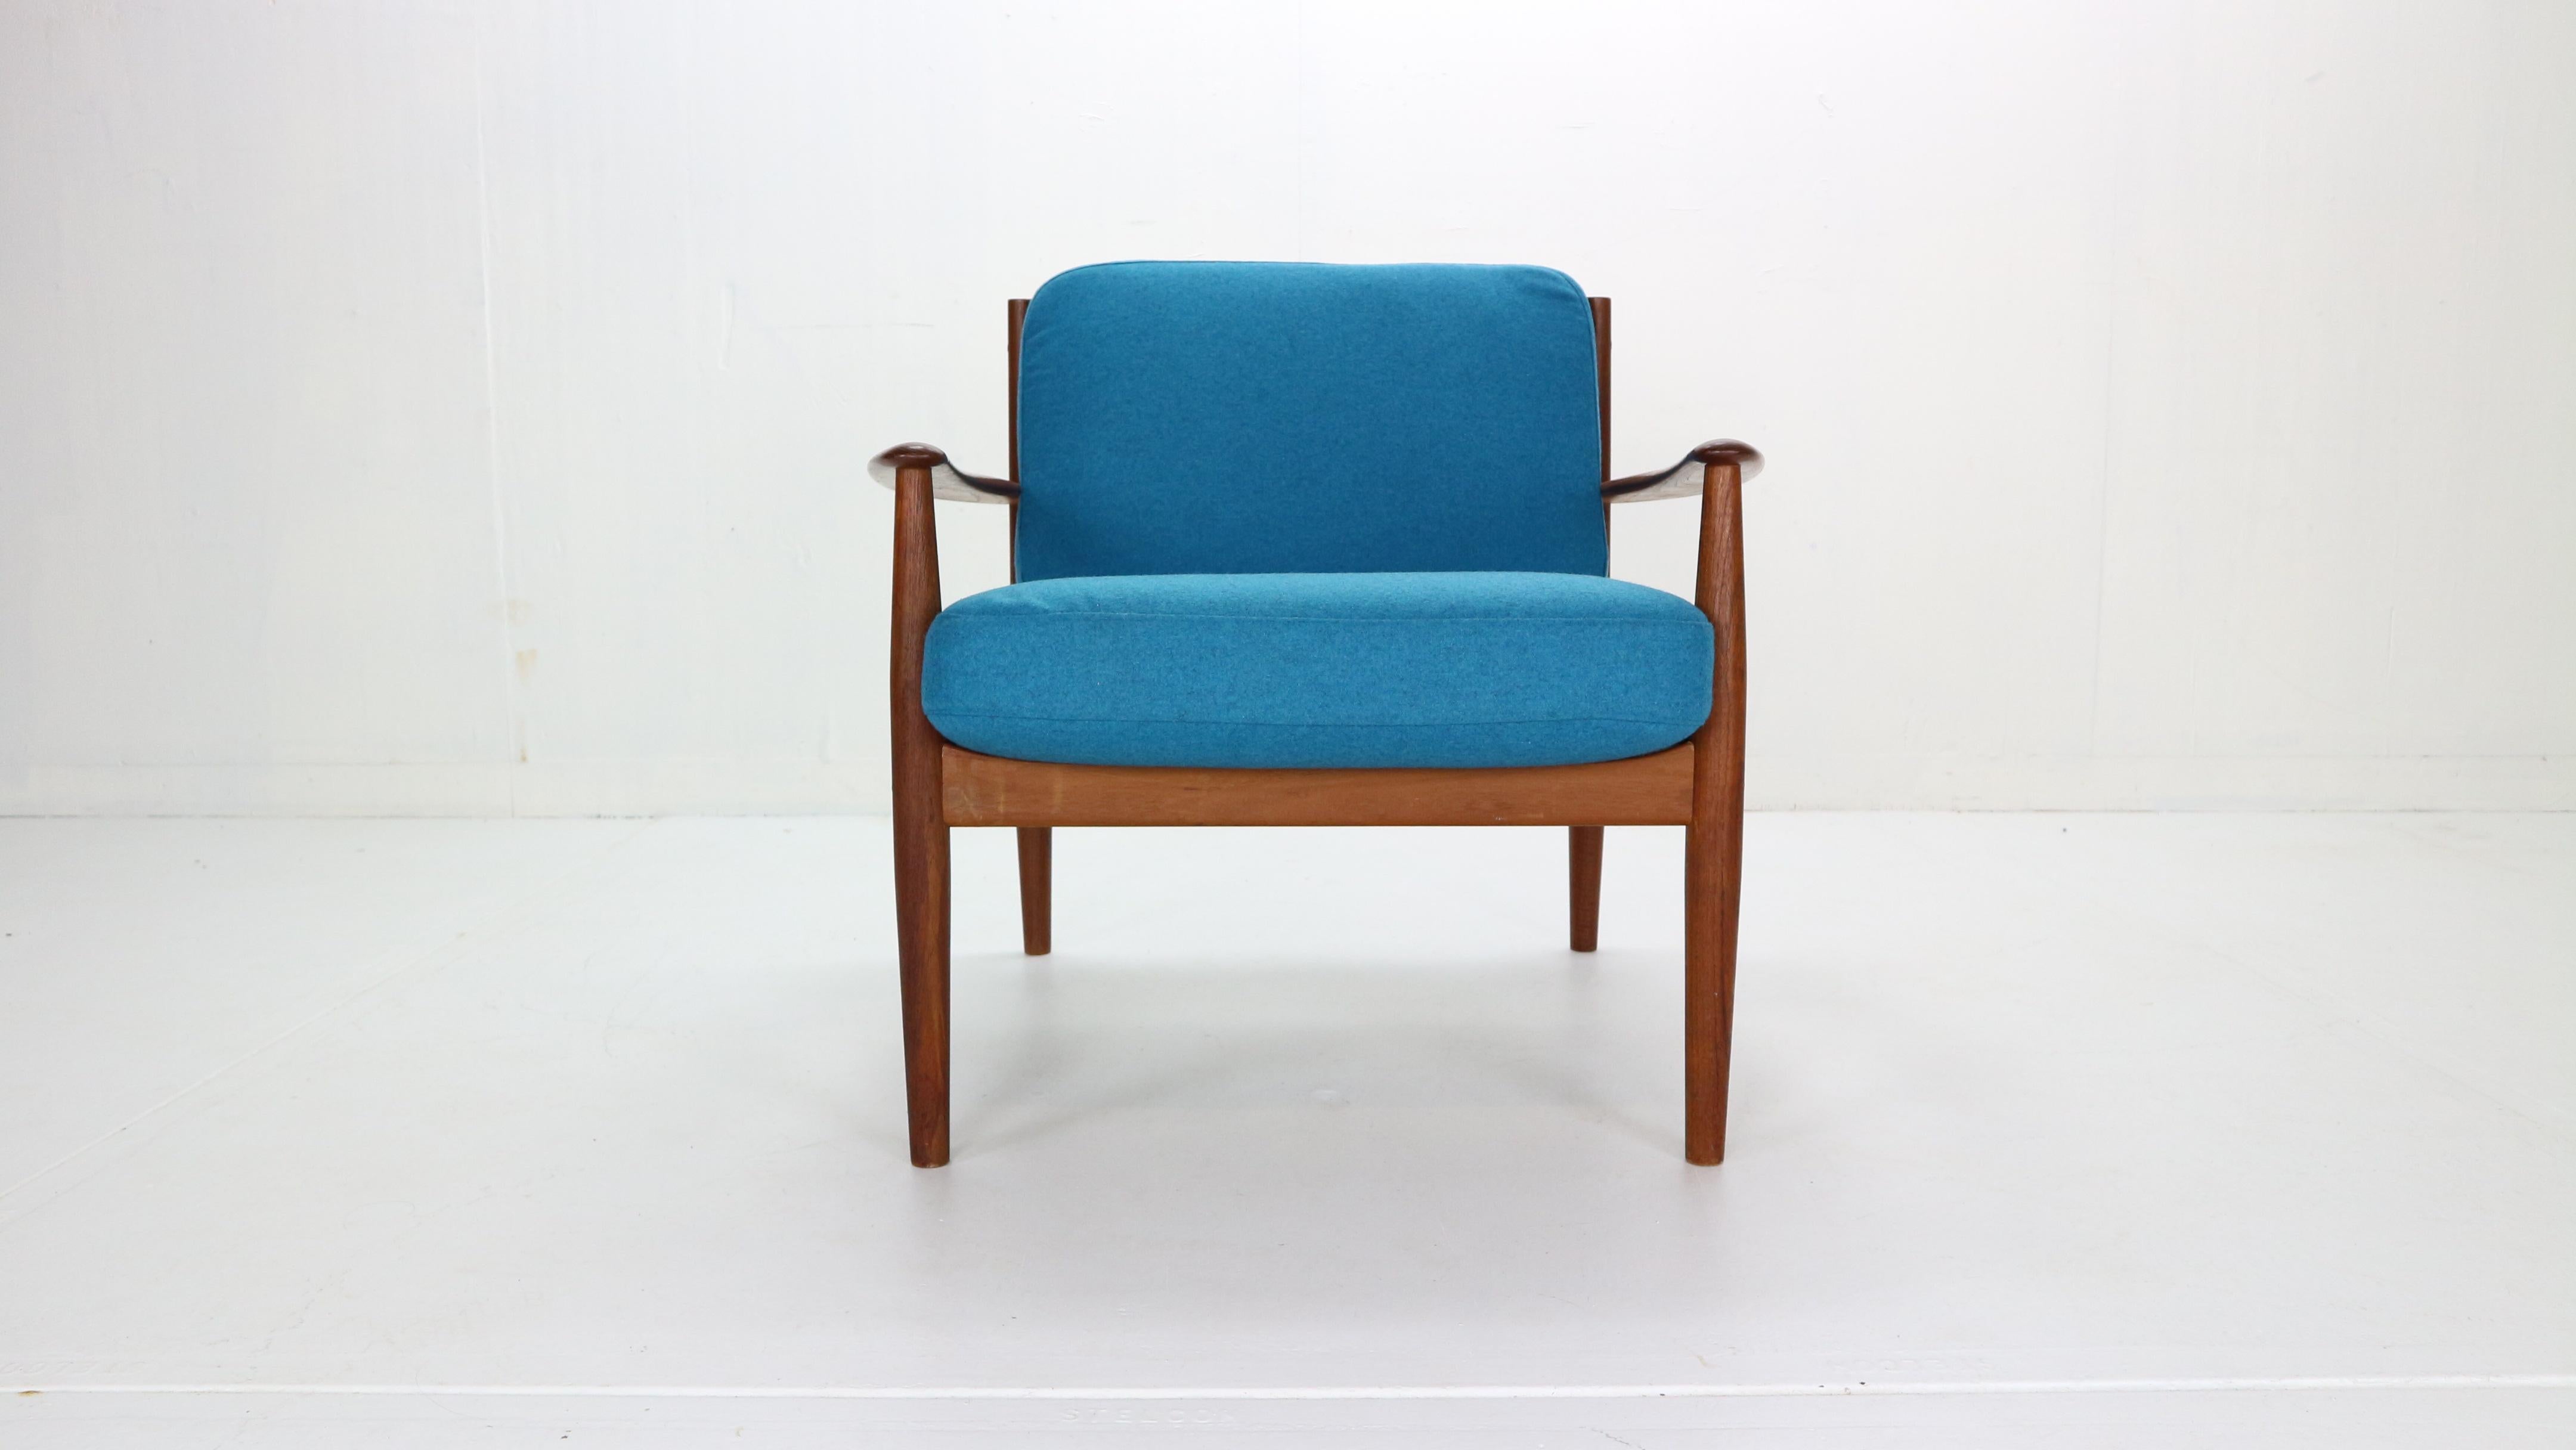 Scandinavian Modern period armchair or lounge chair designed by Grete Jalk and manufactured for France & Søn in 1960s period, Denmark.

The armrest chair shows best Danish quality craftsmanship with it's curved teak armrest and beautiful back